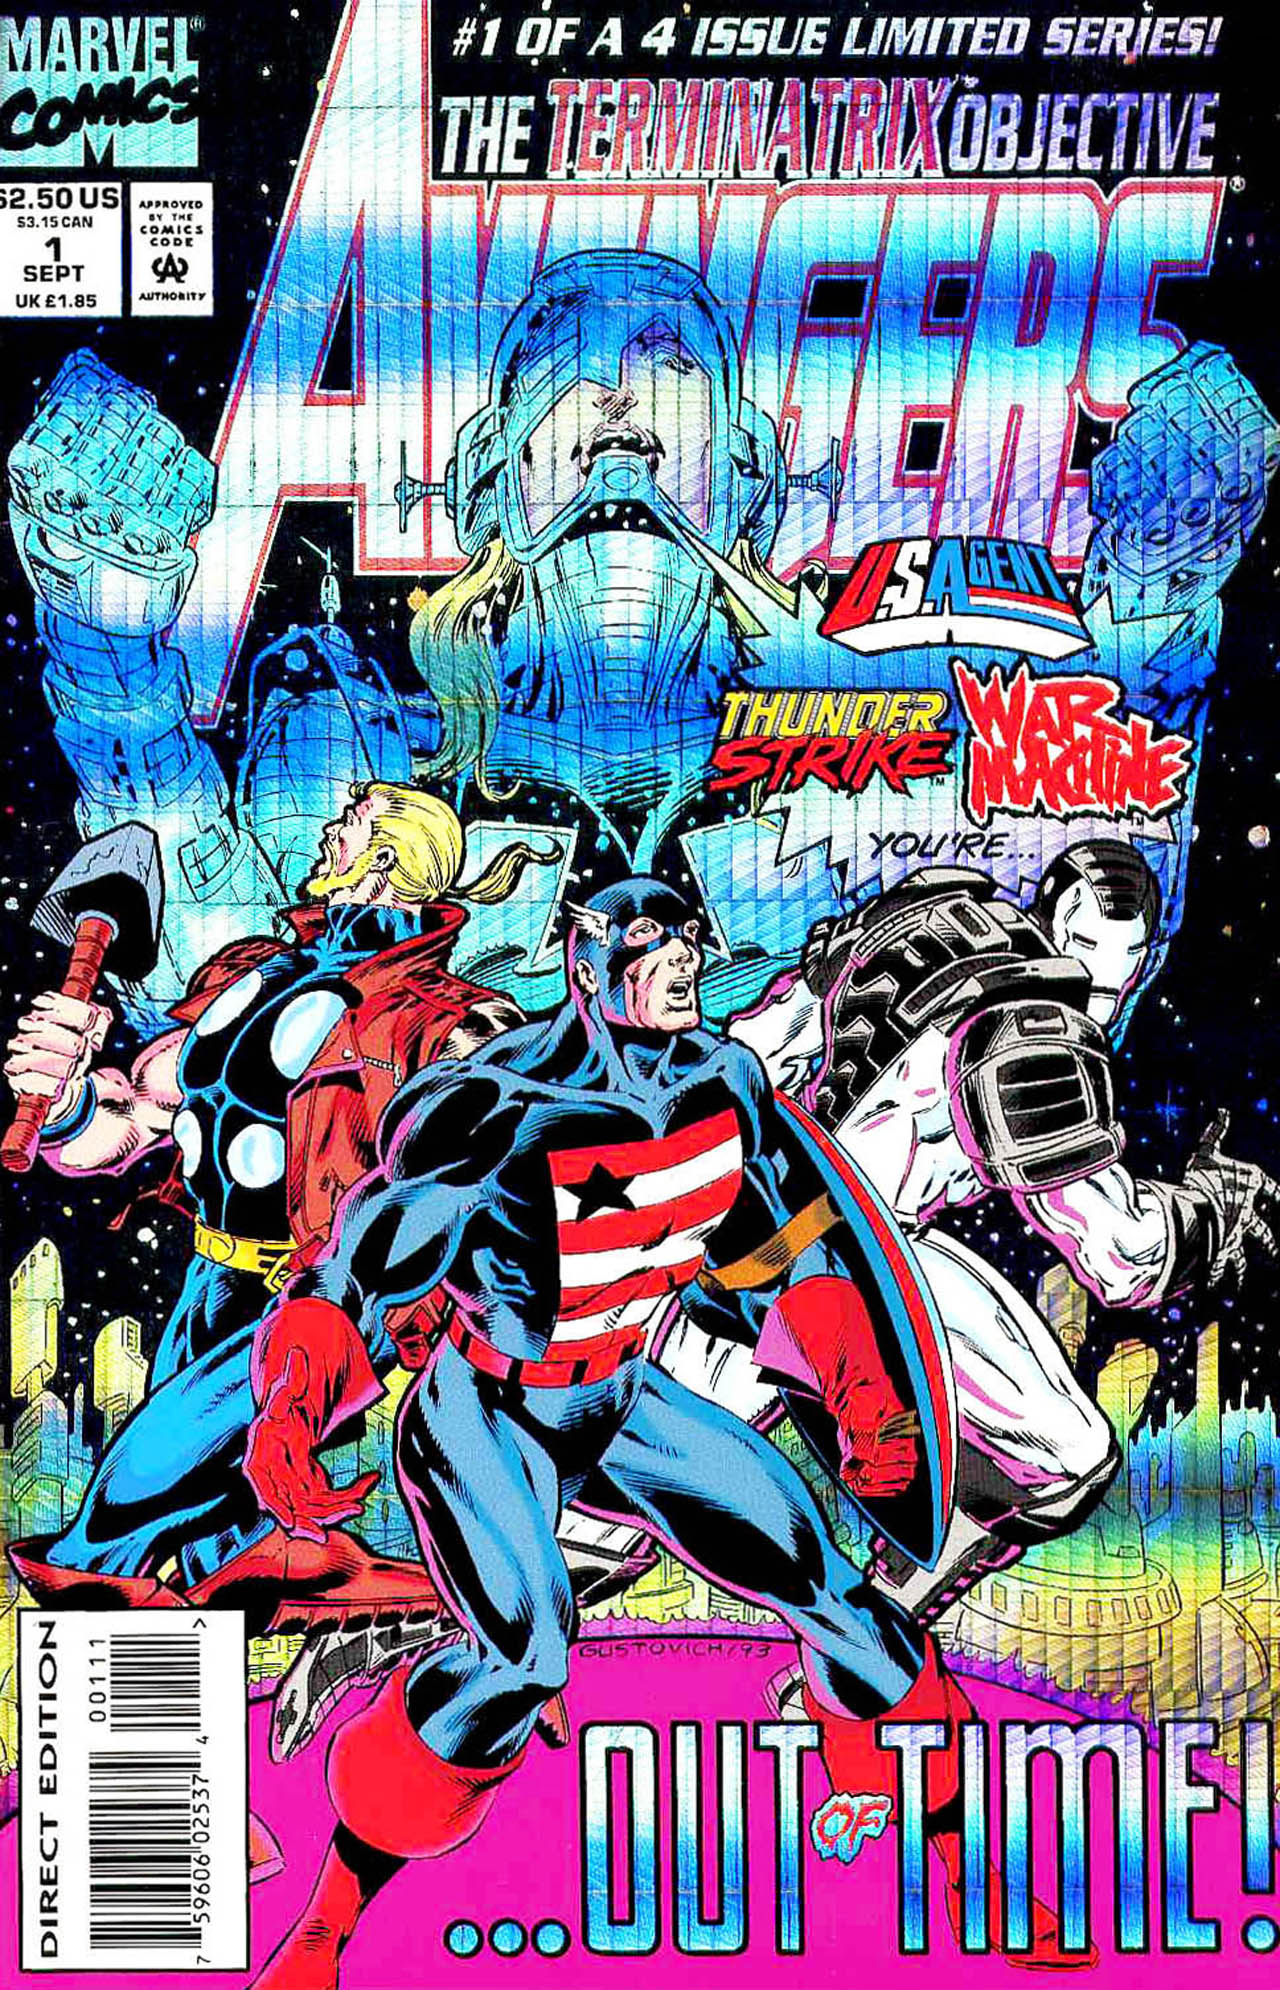 Read online Avengers: The Terminatrix Objective comic -  Issue #1 - 1